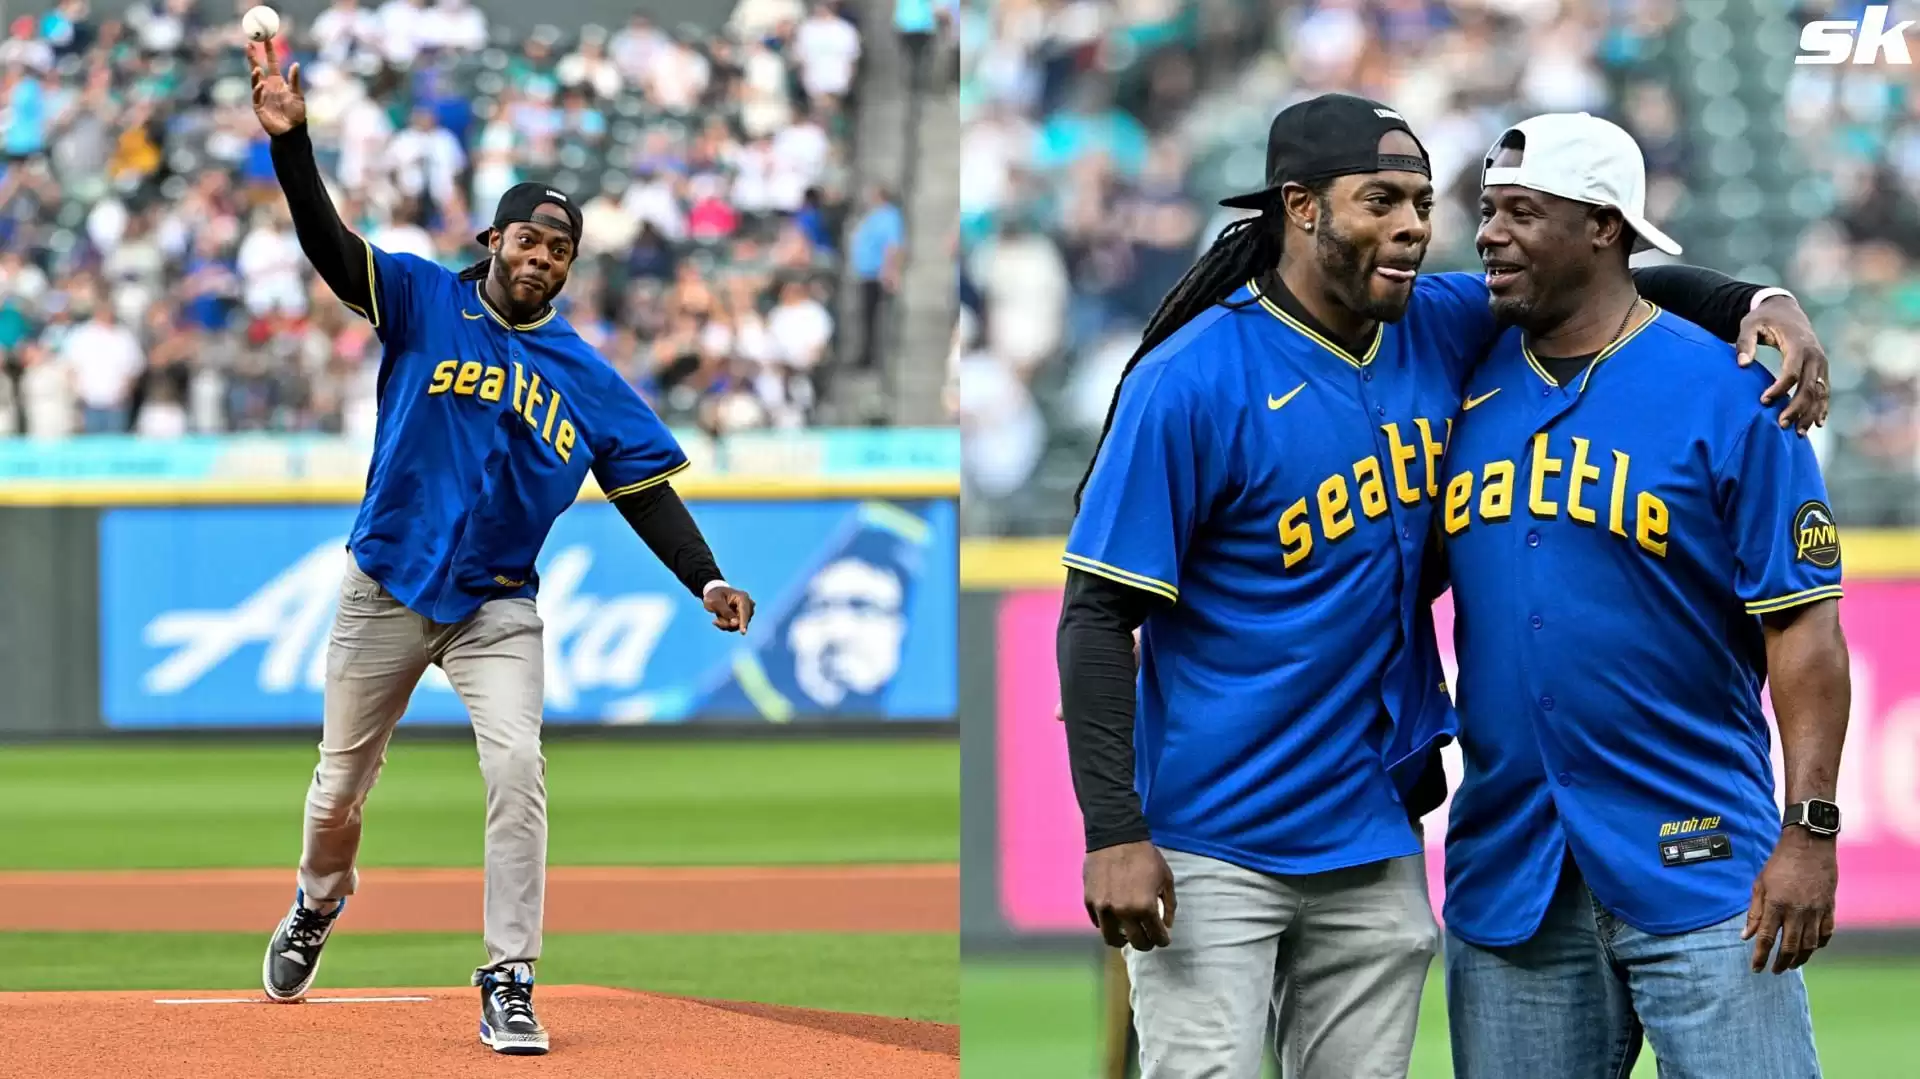 Super Bowl champion Richard Sherman throws out ceremonial first pitch at Seattle Mariners game